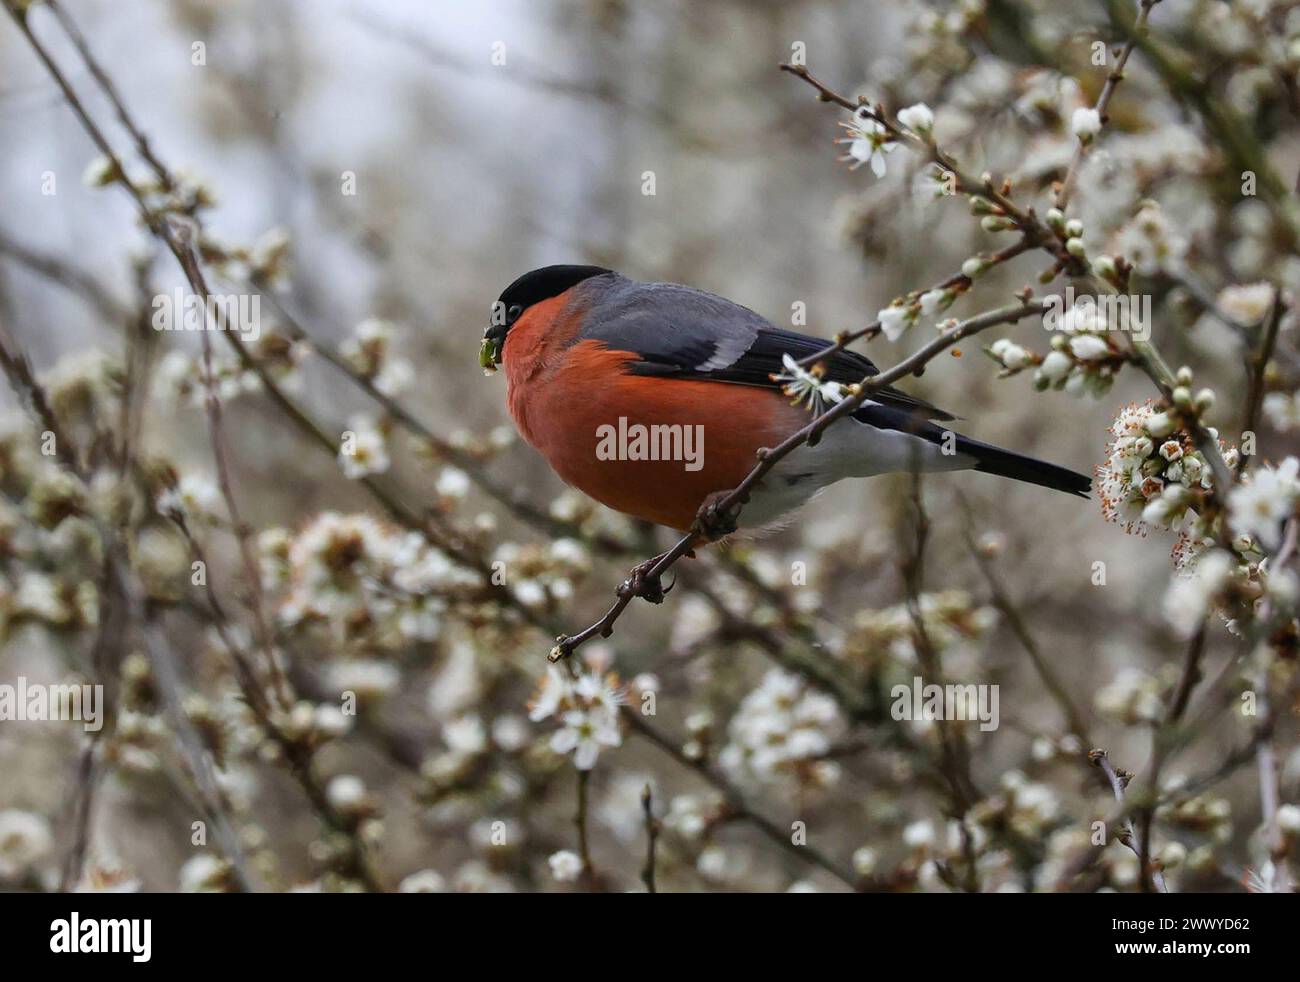 Kinnego, Lough Neagh, County Armagh, Northern Ireland, UK. 26th Mar 2024. UK weather - a drab grey and damp spring day in a cold easterly wind at Lough Neagh. A male bullfinch foraging in fresh spring white blossom. Credit: CAZIMB/Alamy Live News.. Stock Photo